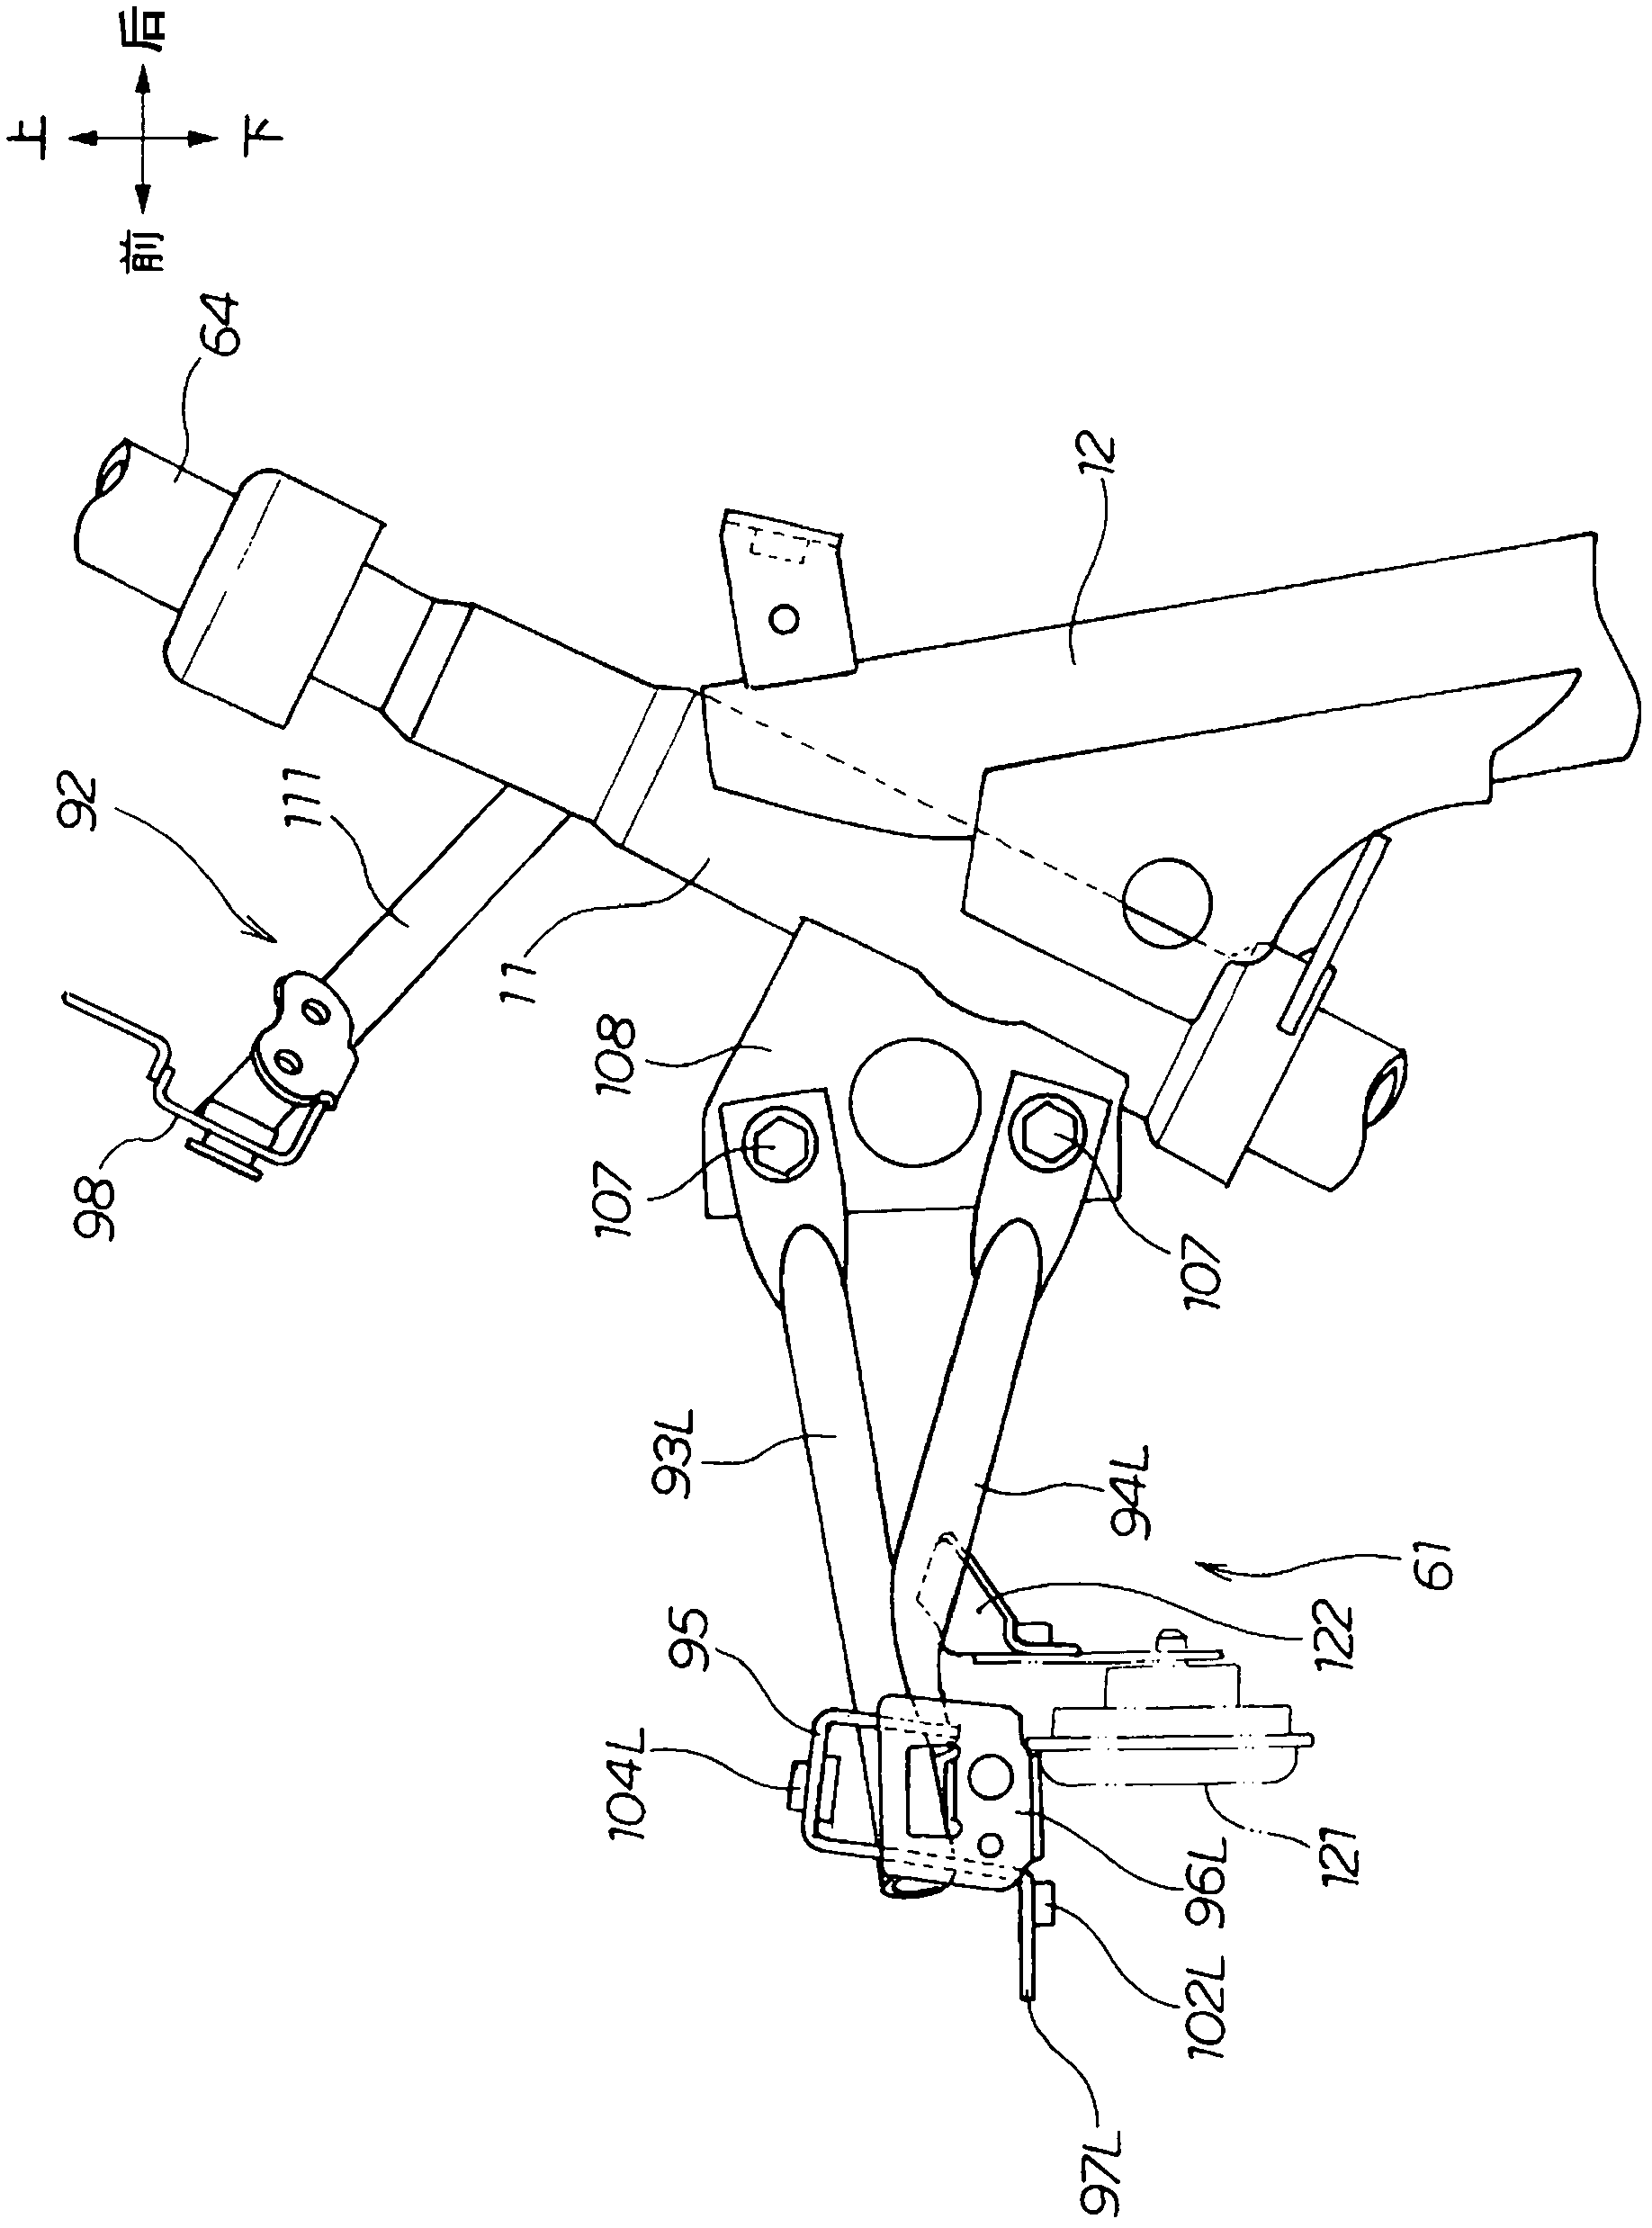 Vehicle lighting device supporting structure